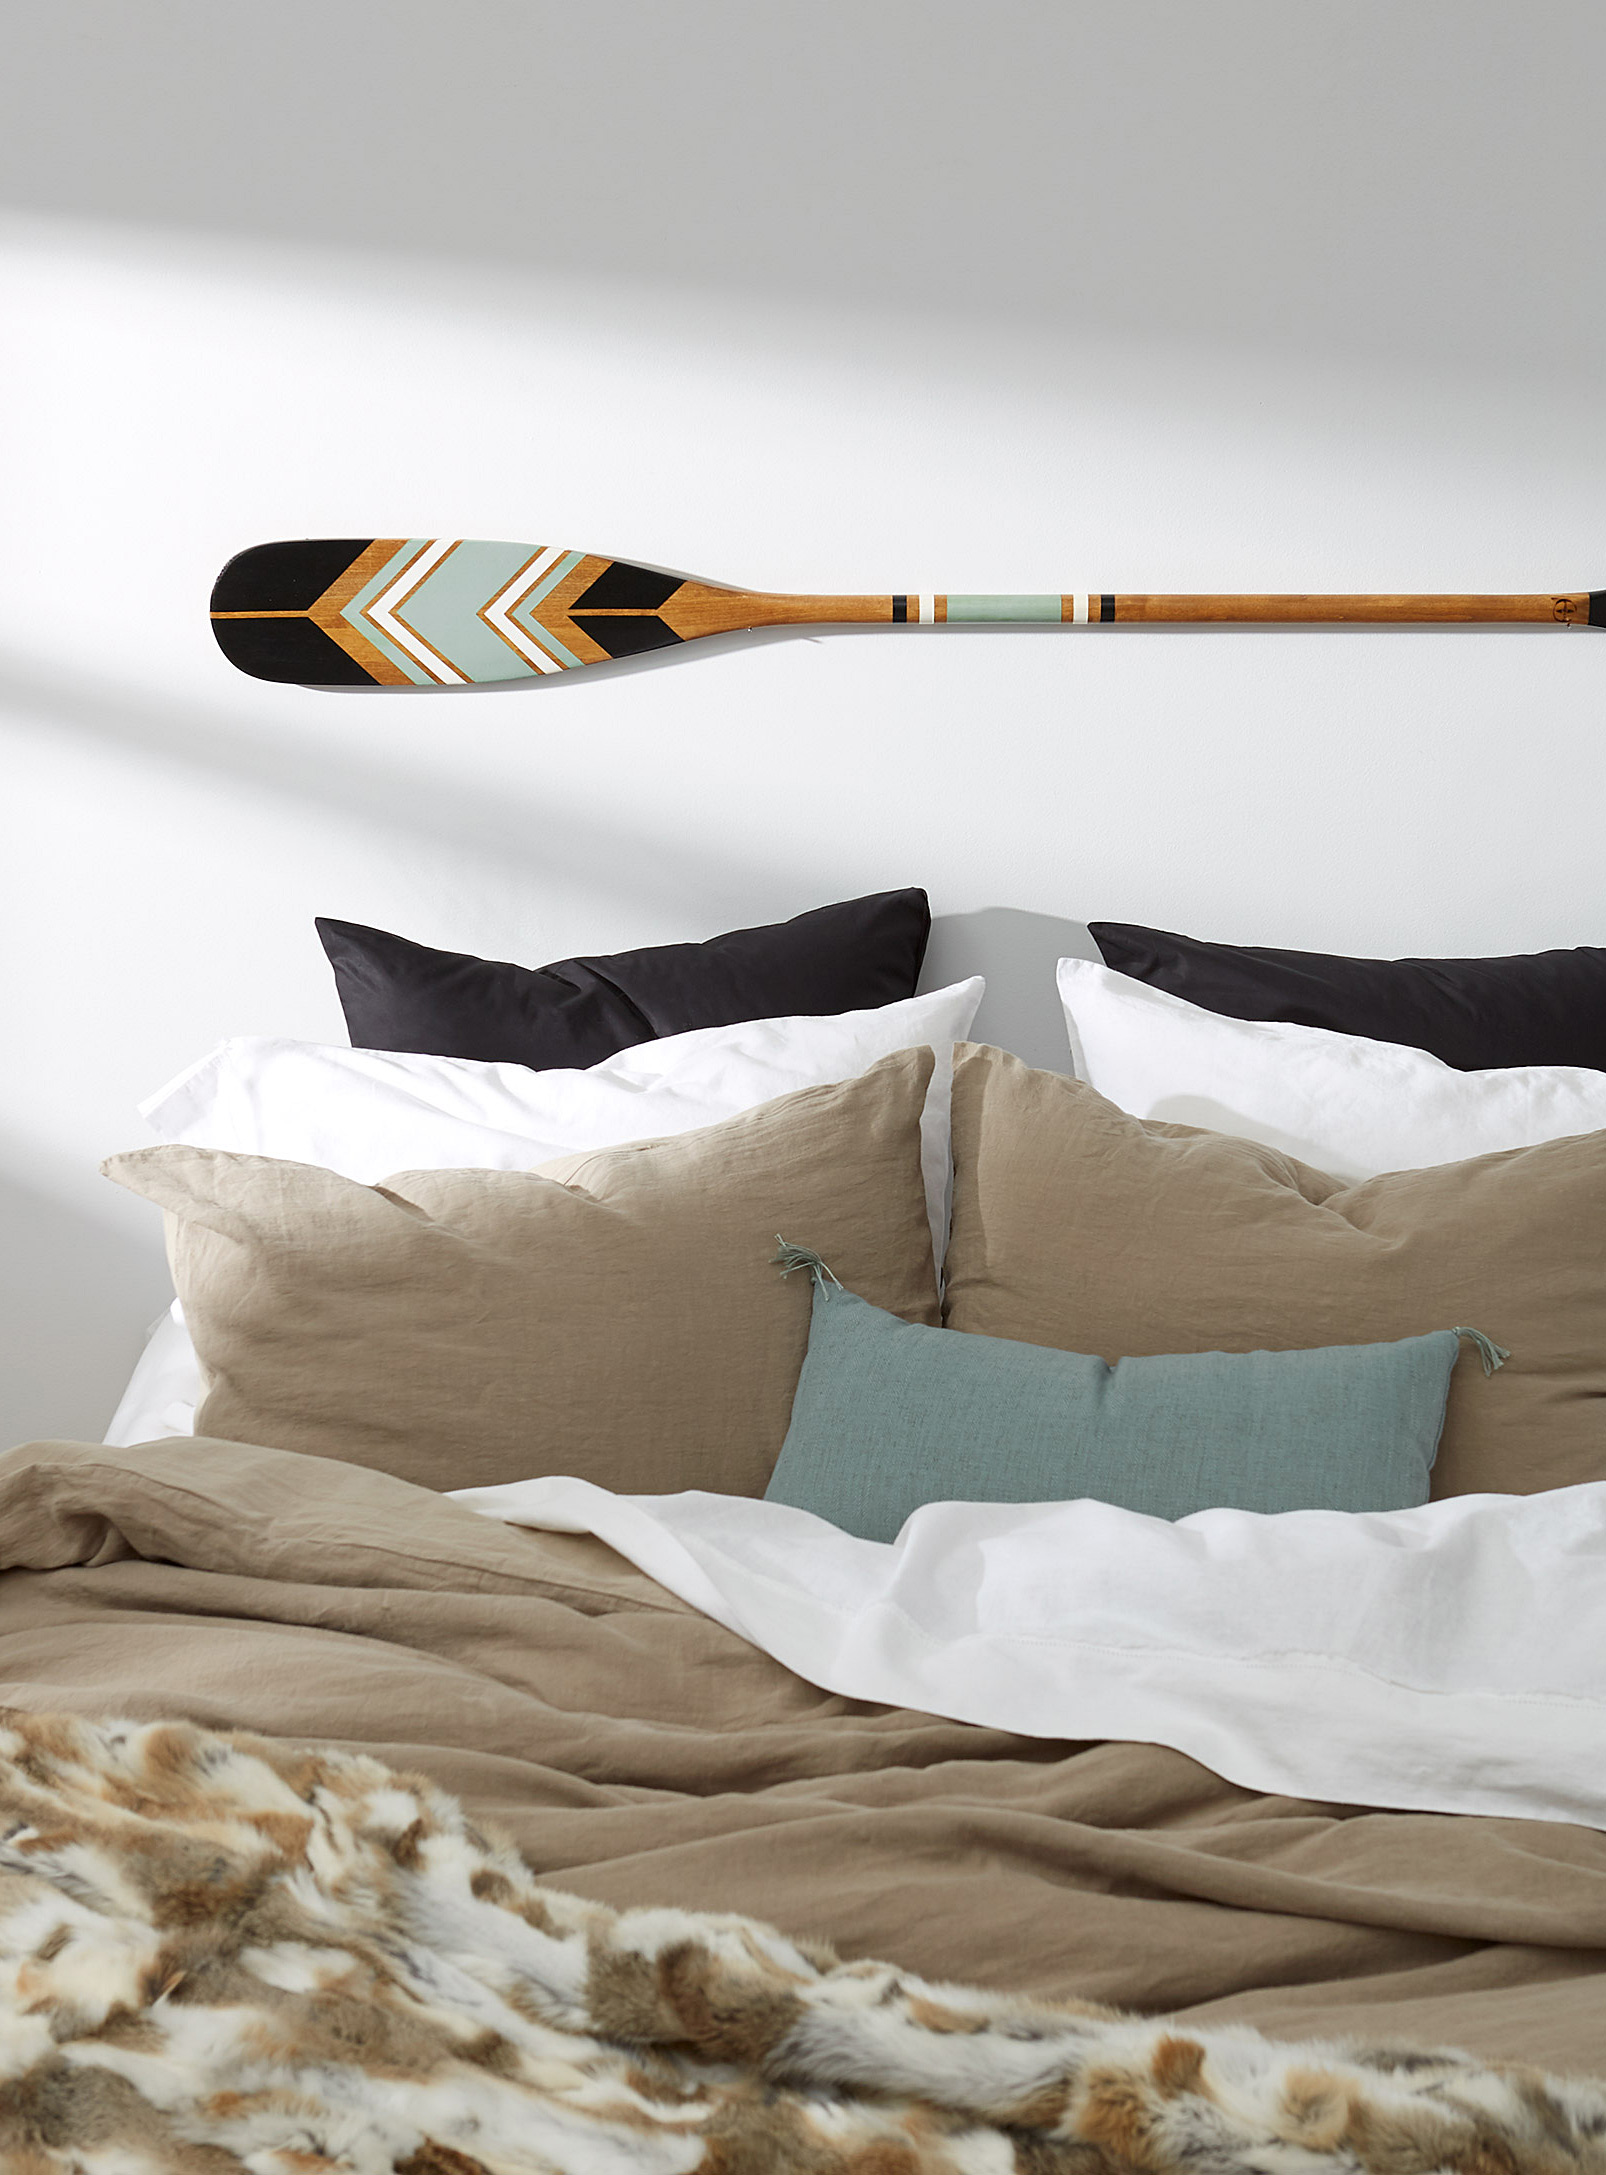 Onquata - The Arctic decorative paddle Offered with or without wall mount